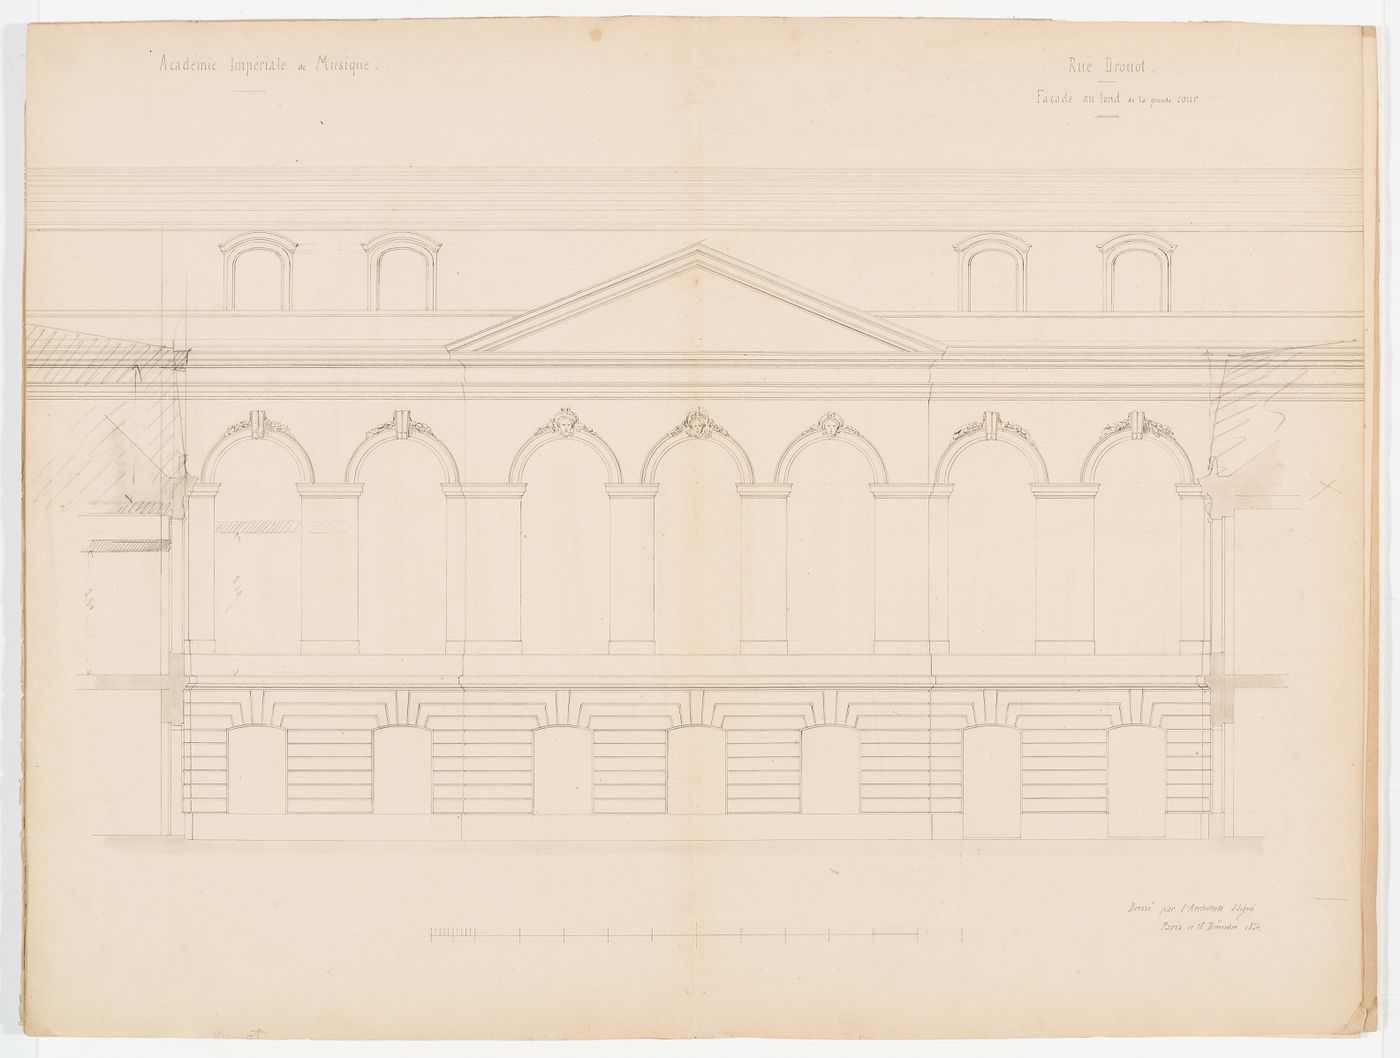 Elevation of the rear façade of the "grand cour", Salle Le Peletier